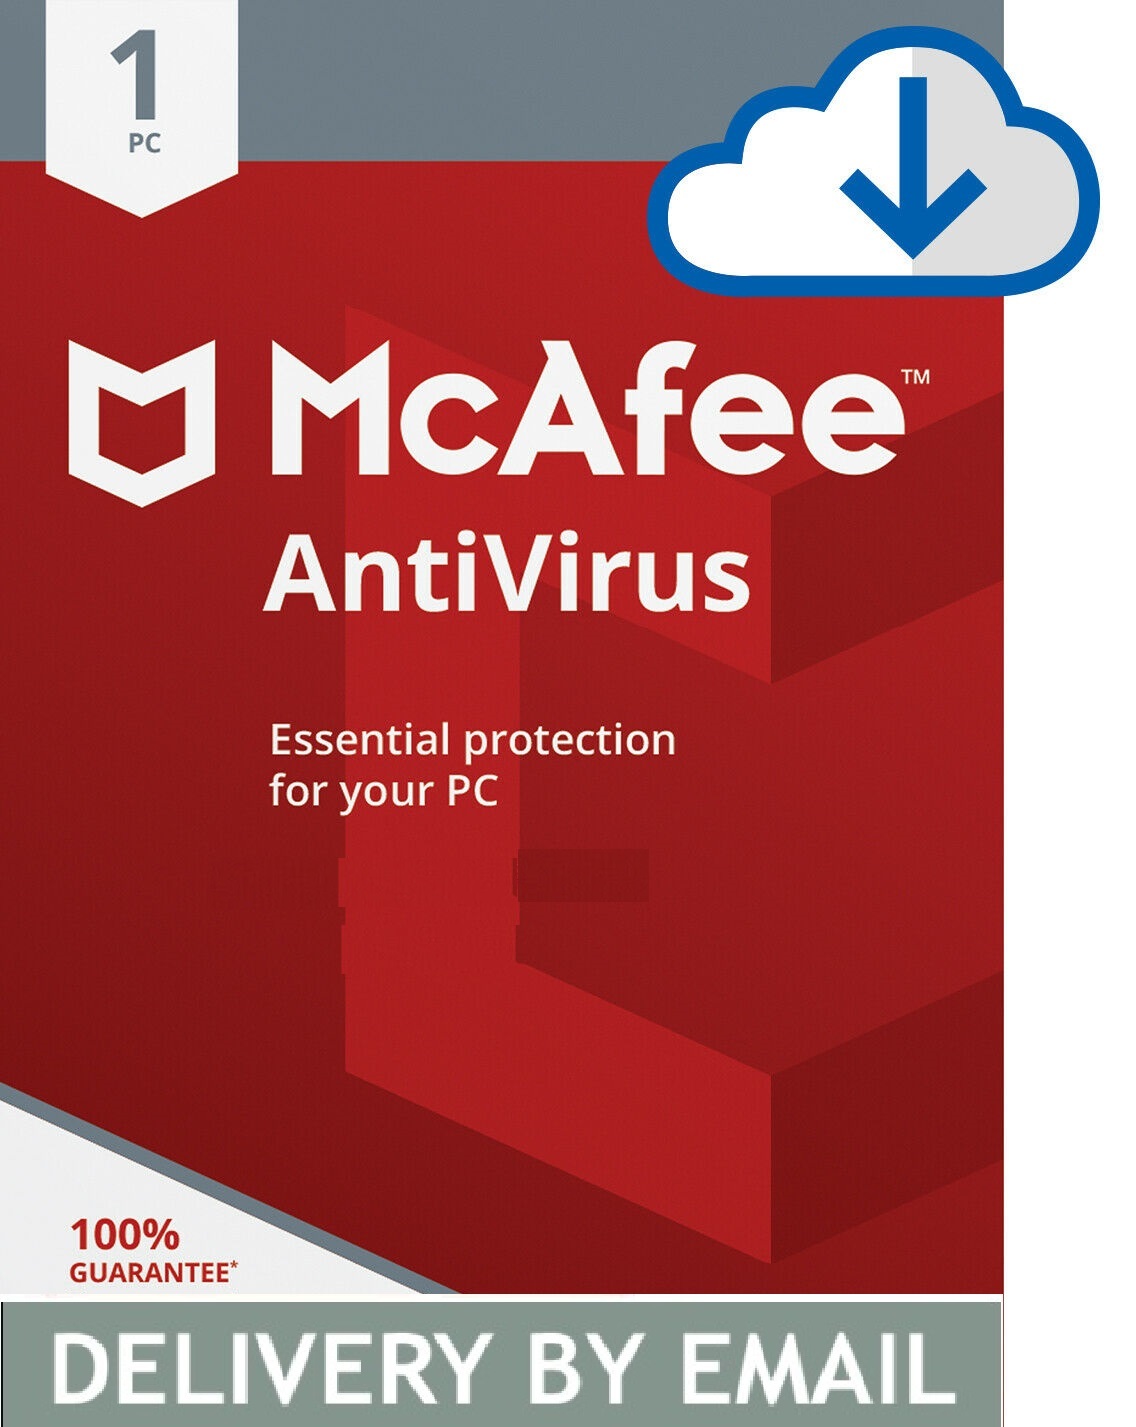 MCAFEE ANTIVIRUS PLUS 2020 - 1 Year  10 PC- DOWNLOAD Version Email Delivery - $24.09